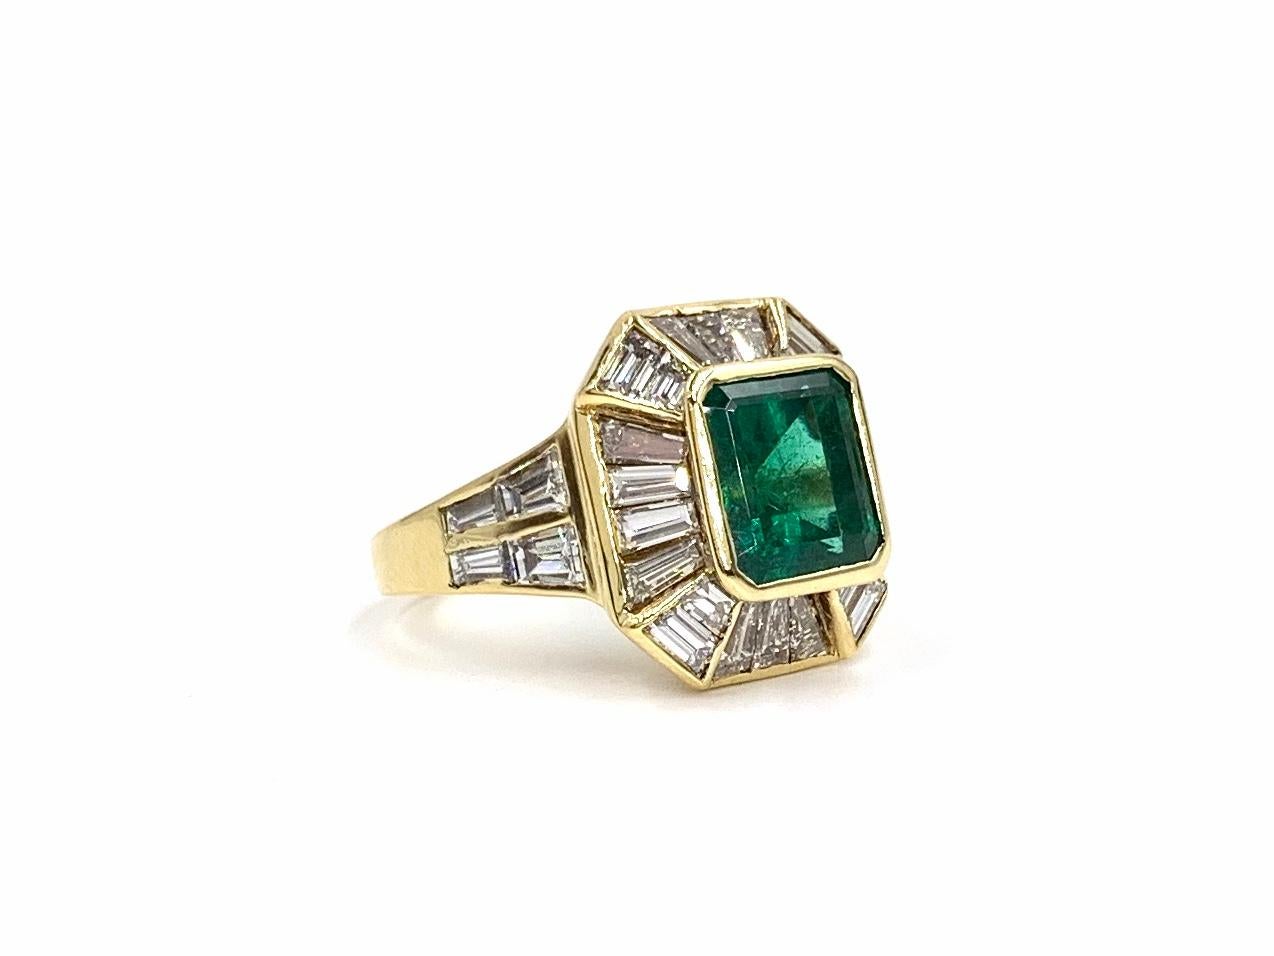 A beautiful, well made 18 karat yellow gold ring featuring a genuine saturated emerald at approximately 2.50 carats surrounded by approximately 3 carats of baguette cut white diamonds. Diamonds are approximately F-G color, VS2 clarity (eye clean).